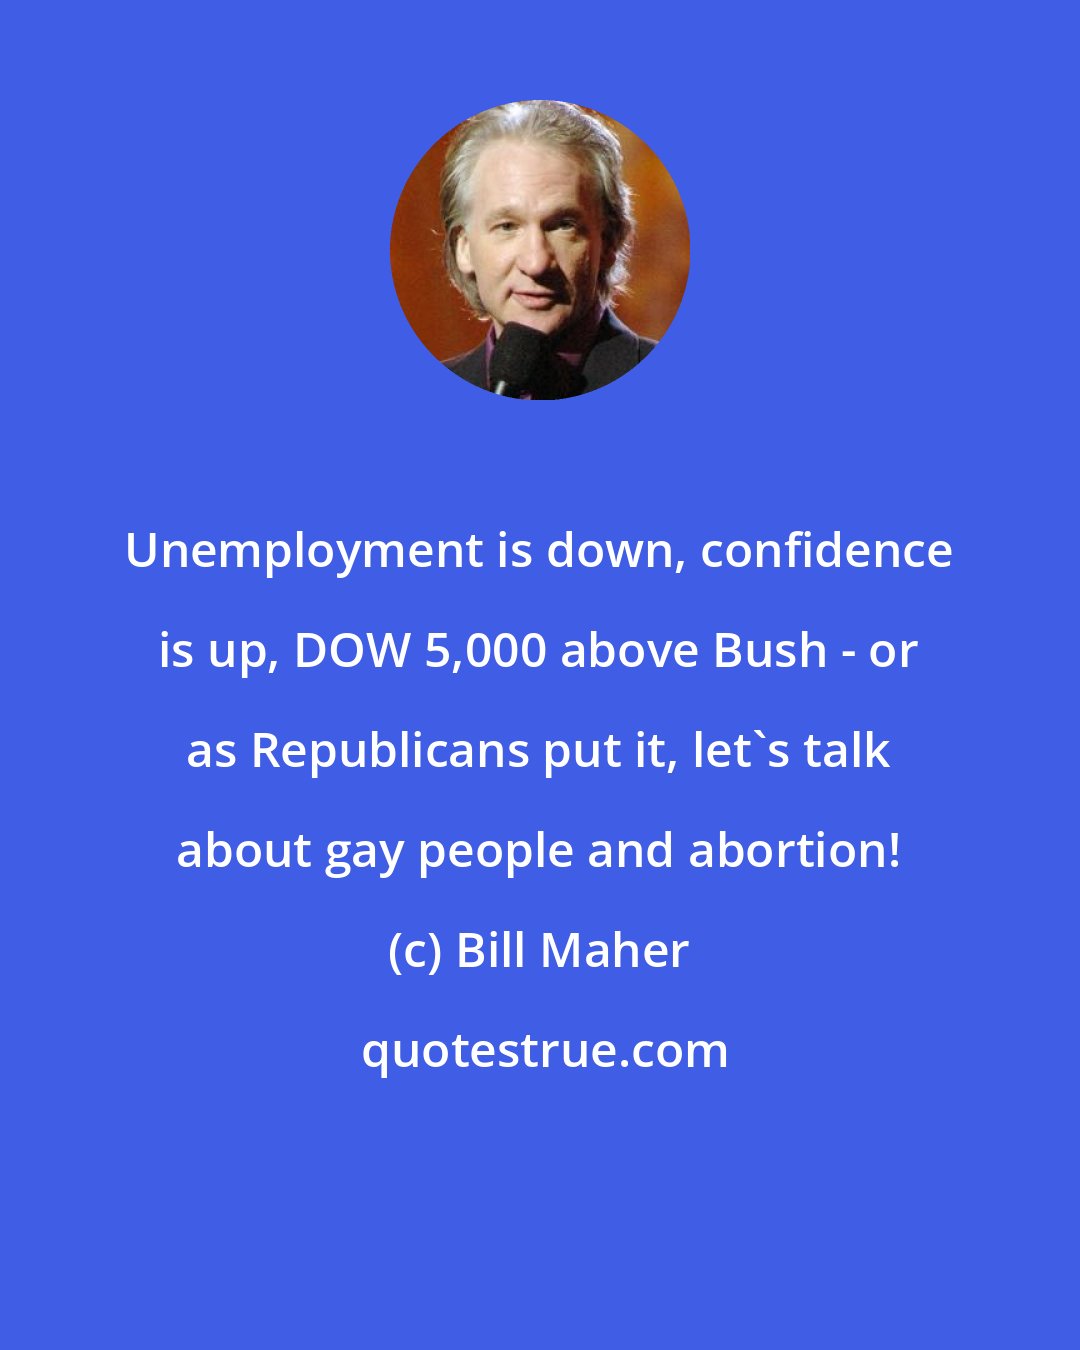 Bill Maher: Unemployment is down, confidence is up, DOW 5,000 above Bush - or as Republicans put it, let's talk about gay people and abortion!